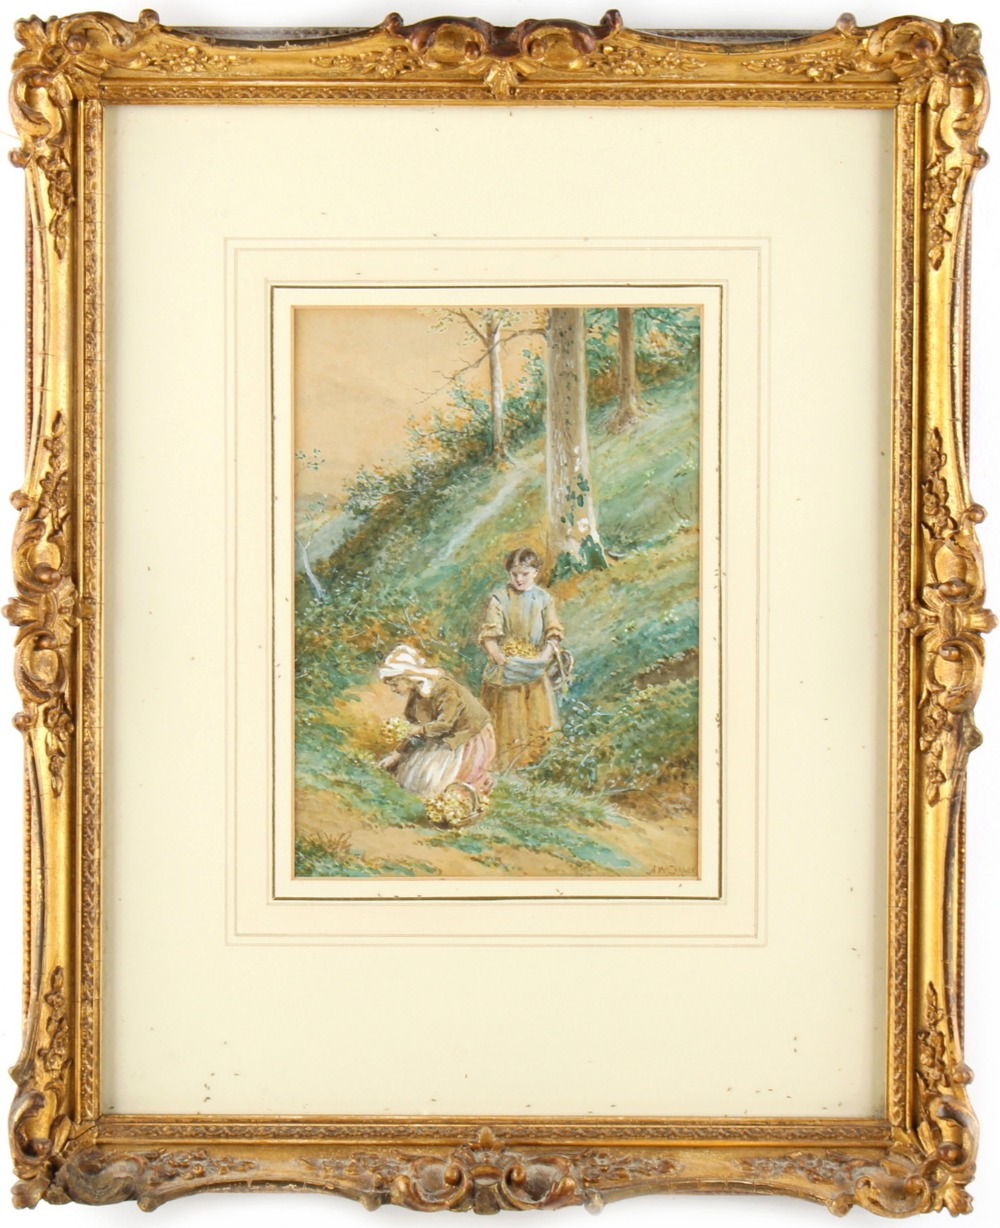 Property of a gentleman - A.W. Cooper (exh.1880-1901) - TWO GIRLS PICKING PRIMROSES - watercolour,